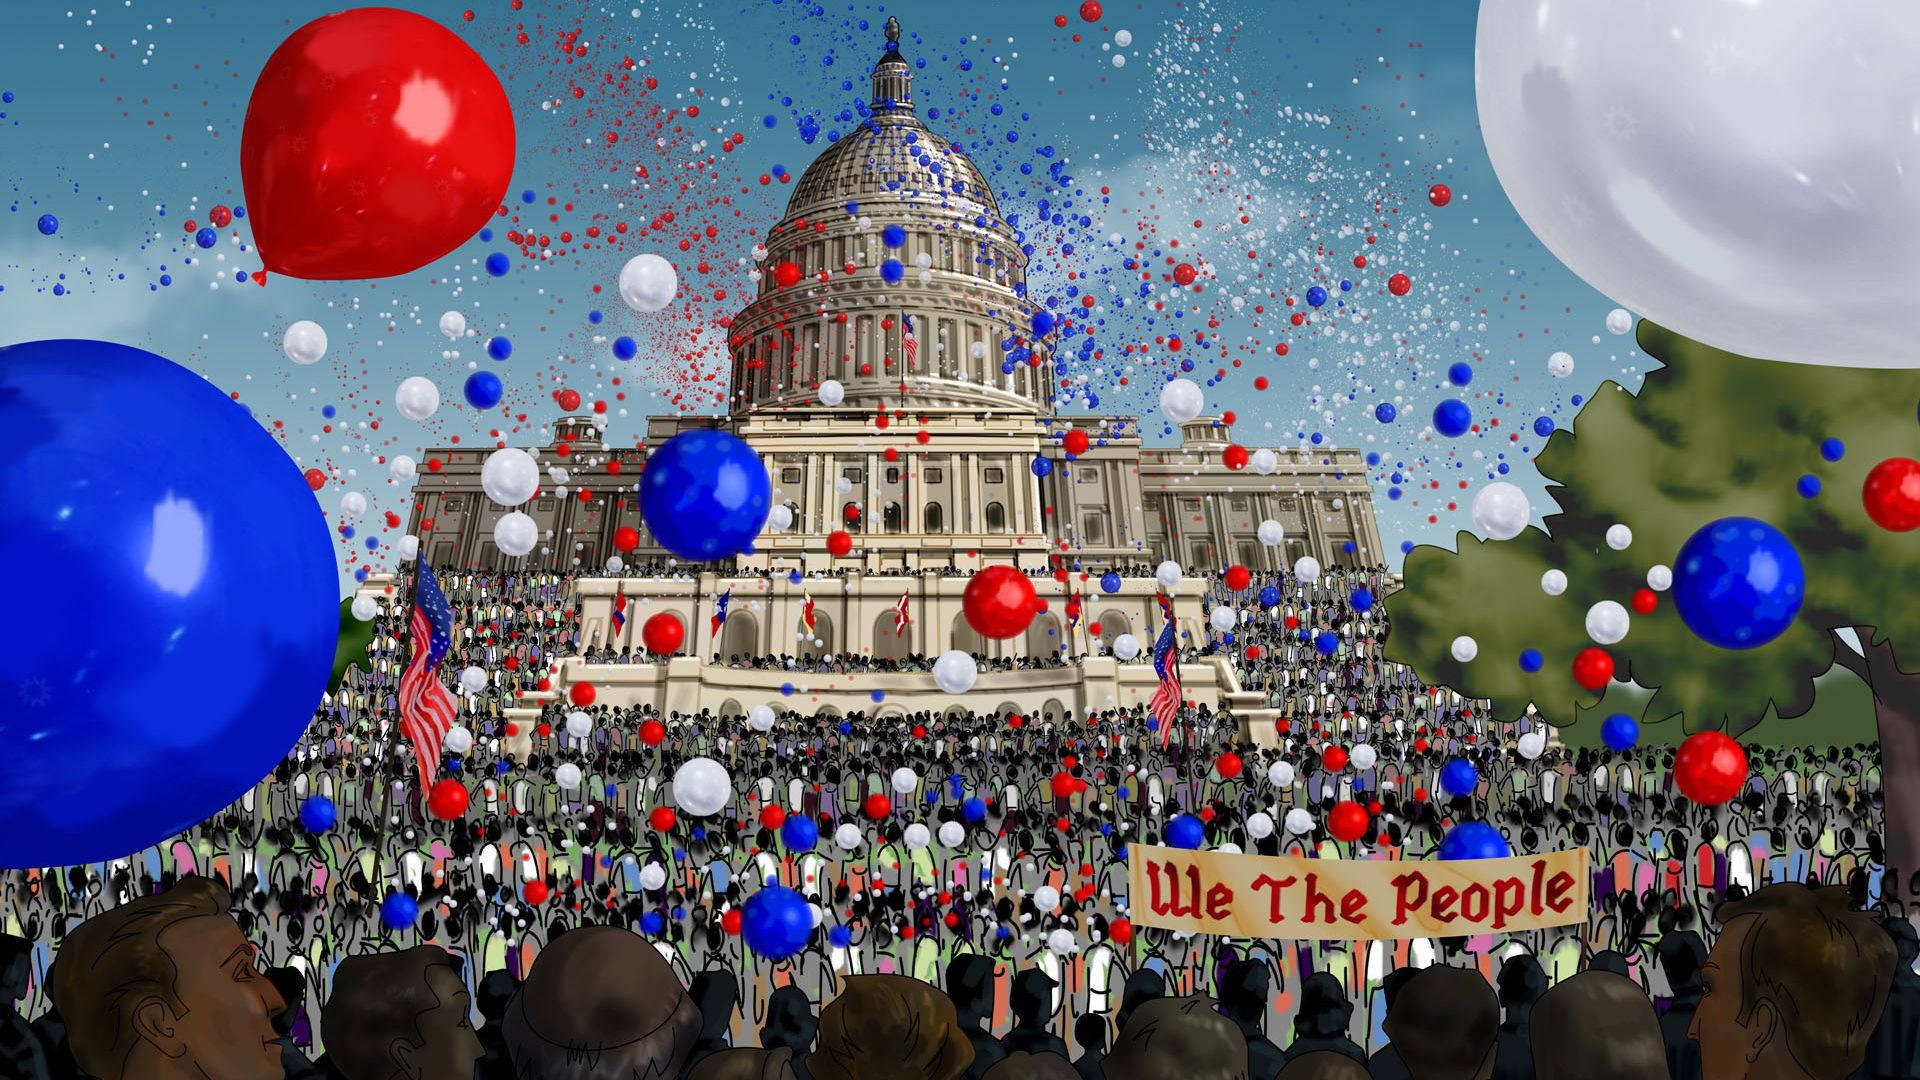 A Cartoon Of A Crowd Of People With Balloons In Front Of The Capitol Building Background